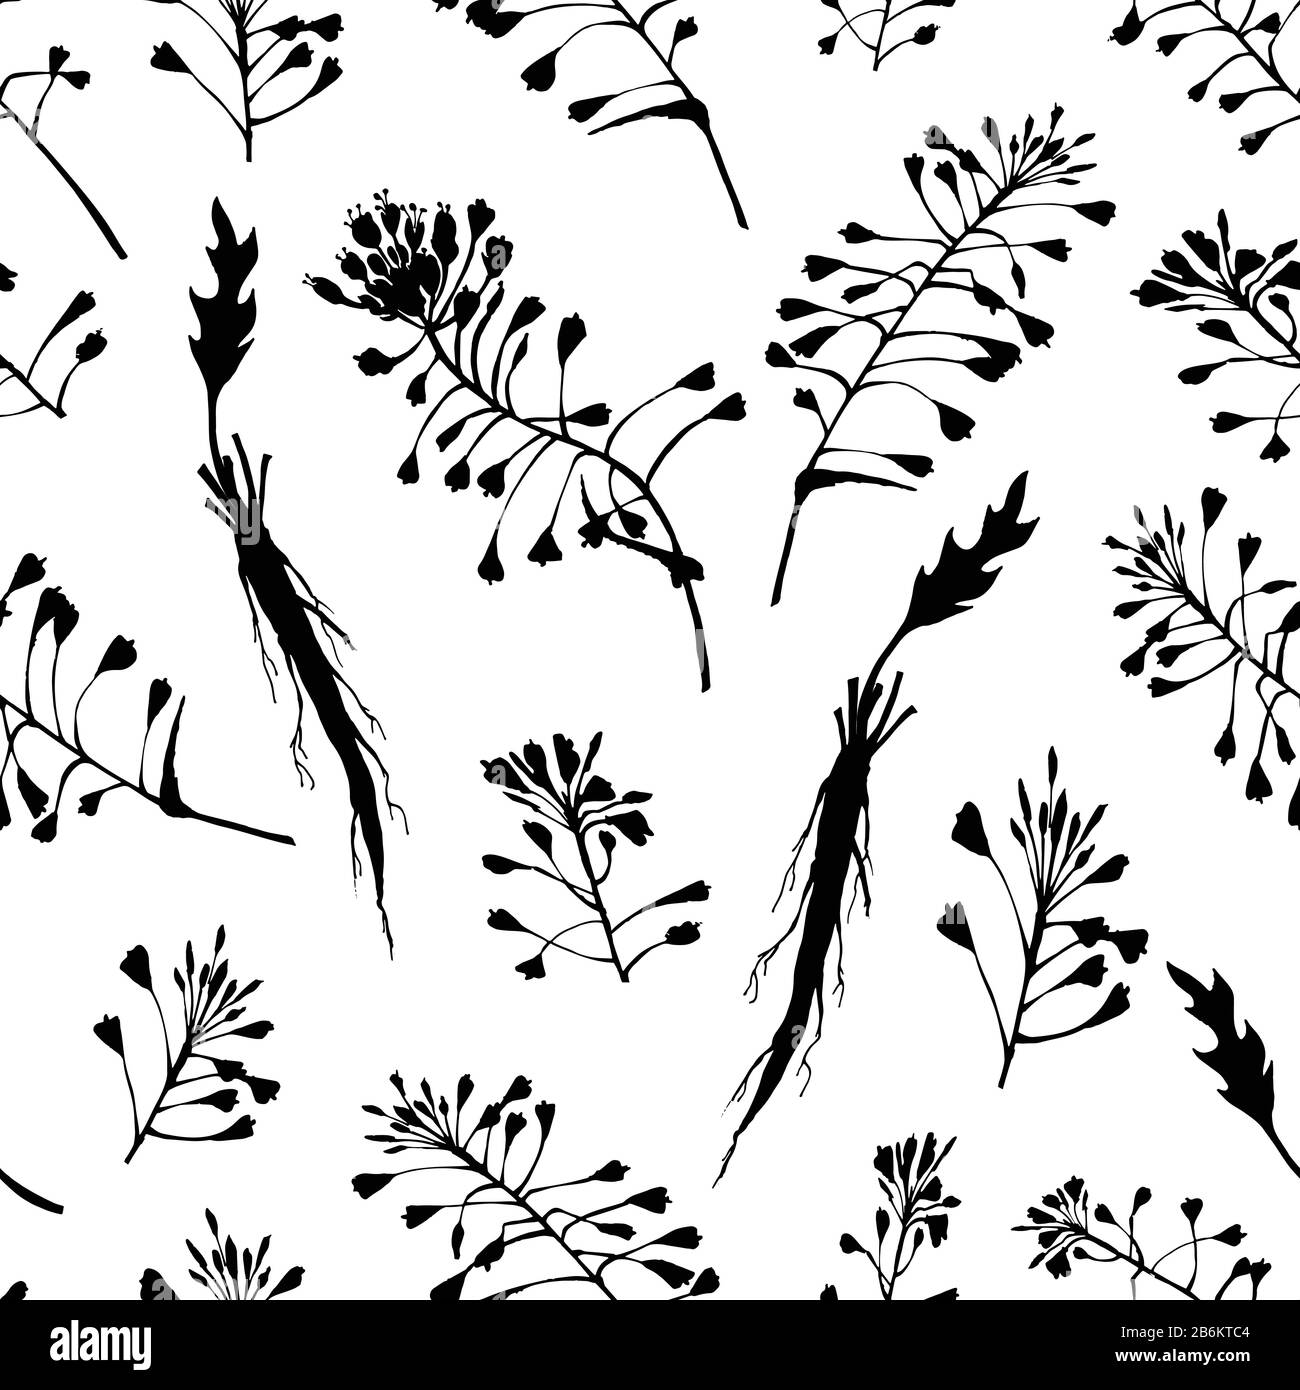 Seamless pattern with black hand drawn silhouette of Shepherds Purse, lives and flowers isolated on white background. Retro vintage graphic design Stock Vector